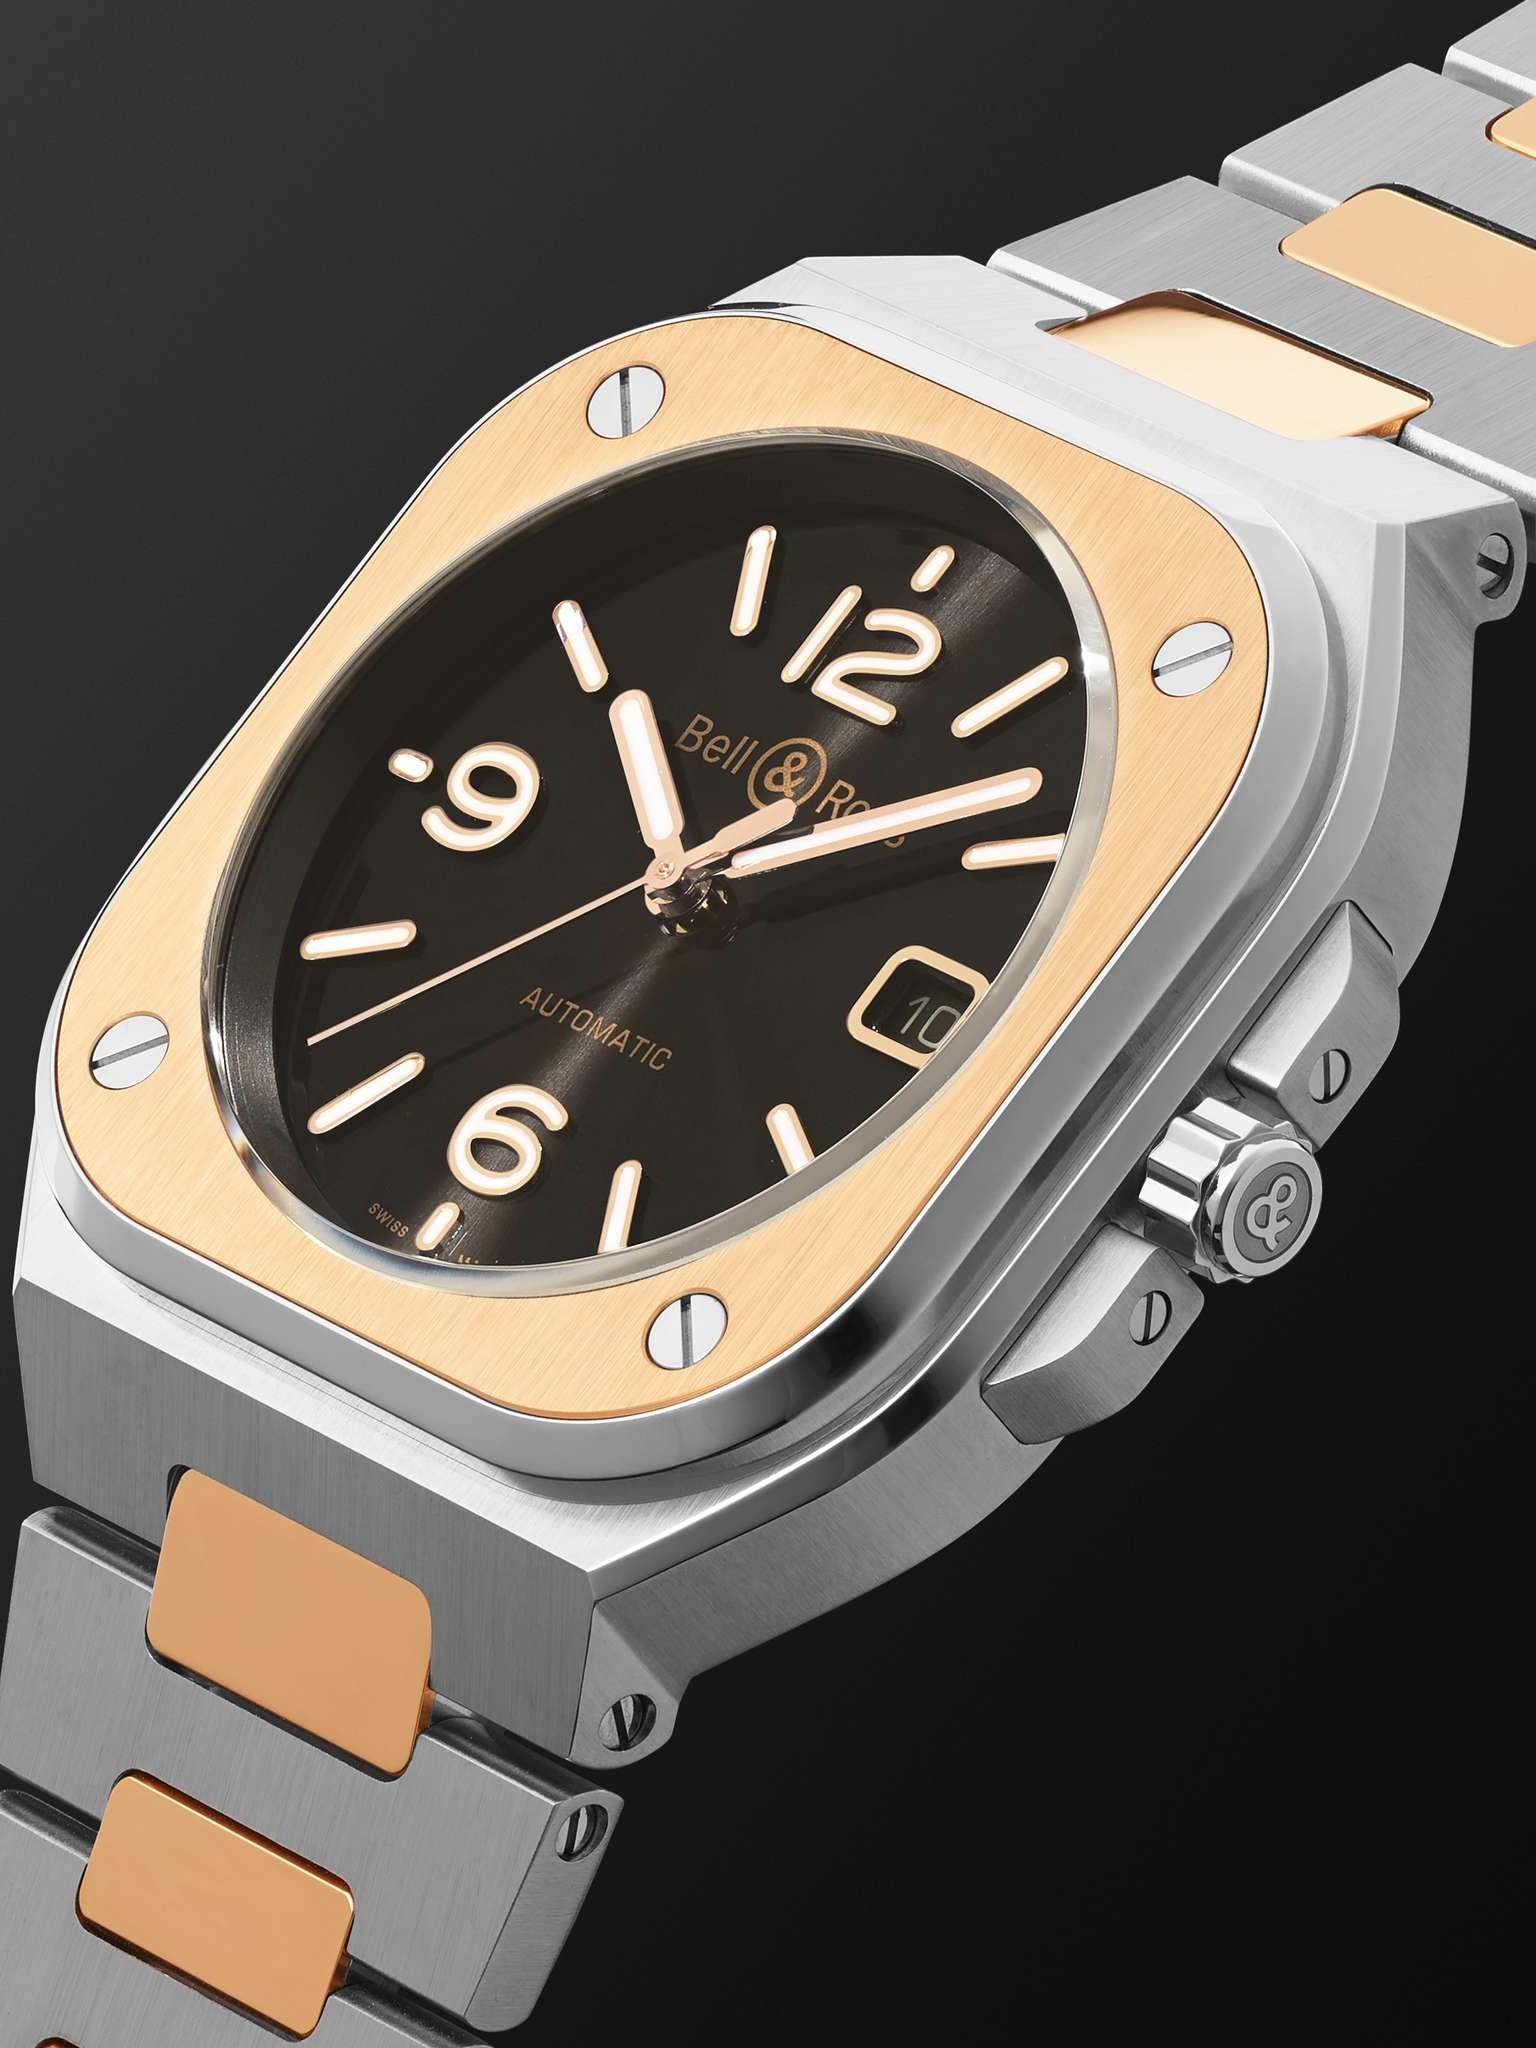 BR 05 Black Steel and Gold Automatic 40mm 18-Karat Rose Gold and Steel Watch, Ref. No. BR05A-BL-STPG - 4